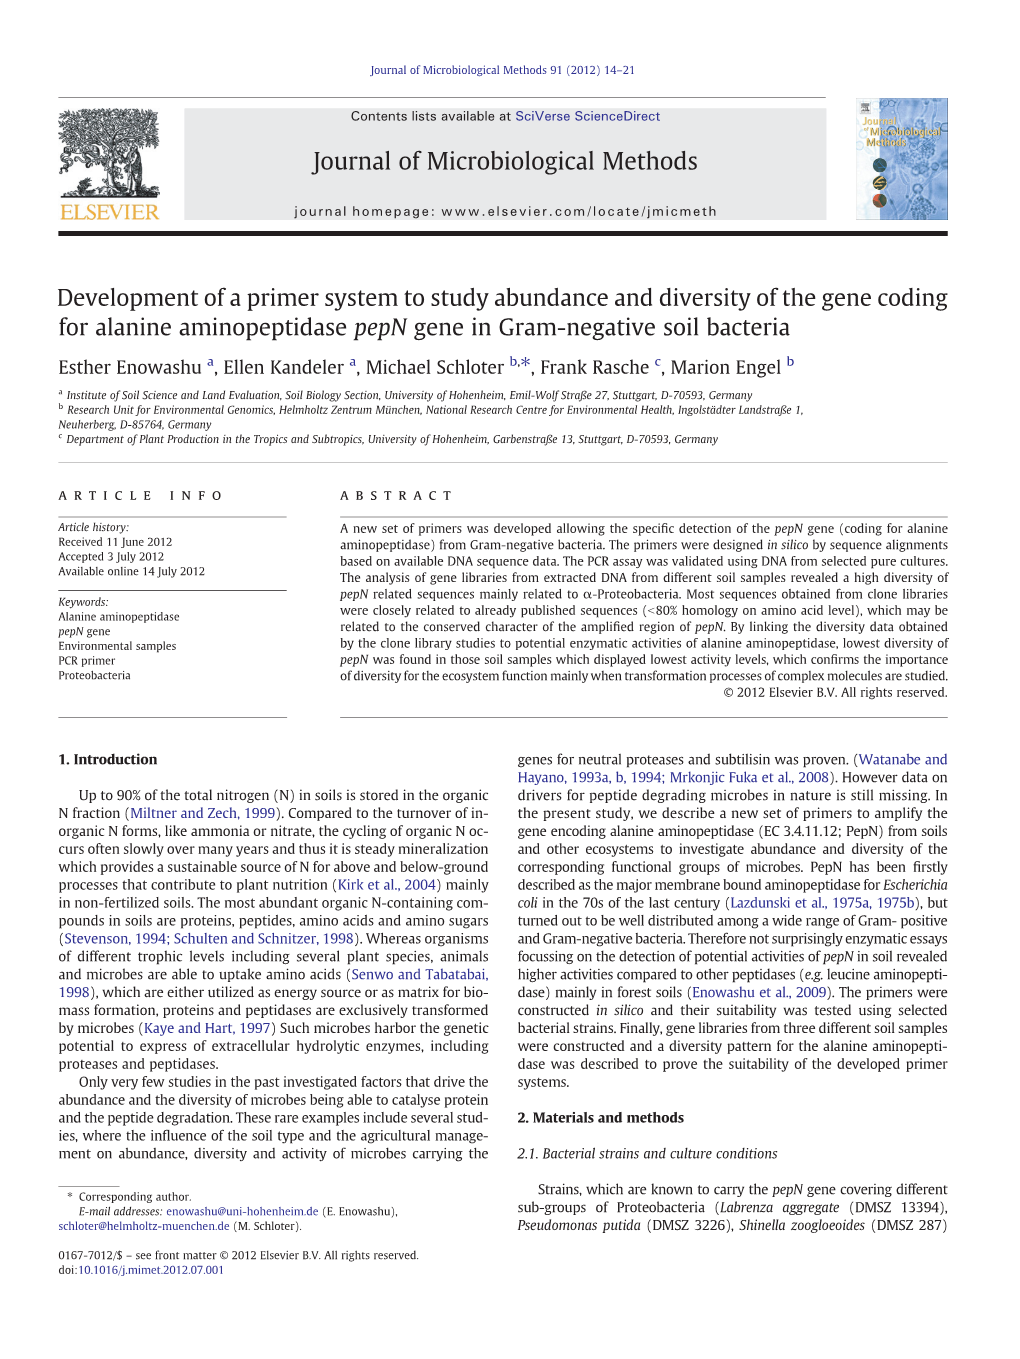 Development of a Primer System to Study Abundance and Diversity of the Gene Coding for Alanine Aminopeptidase Pepn Gene in Gram-Negative Soil Bacteria